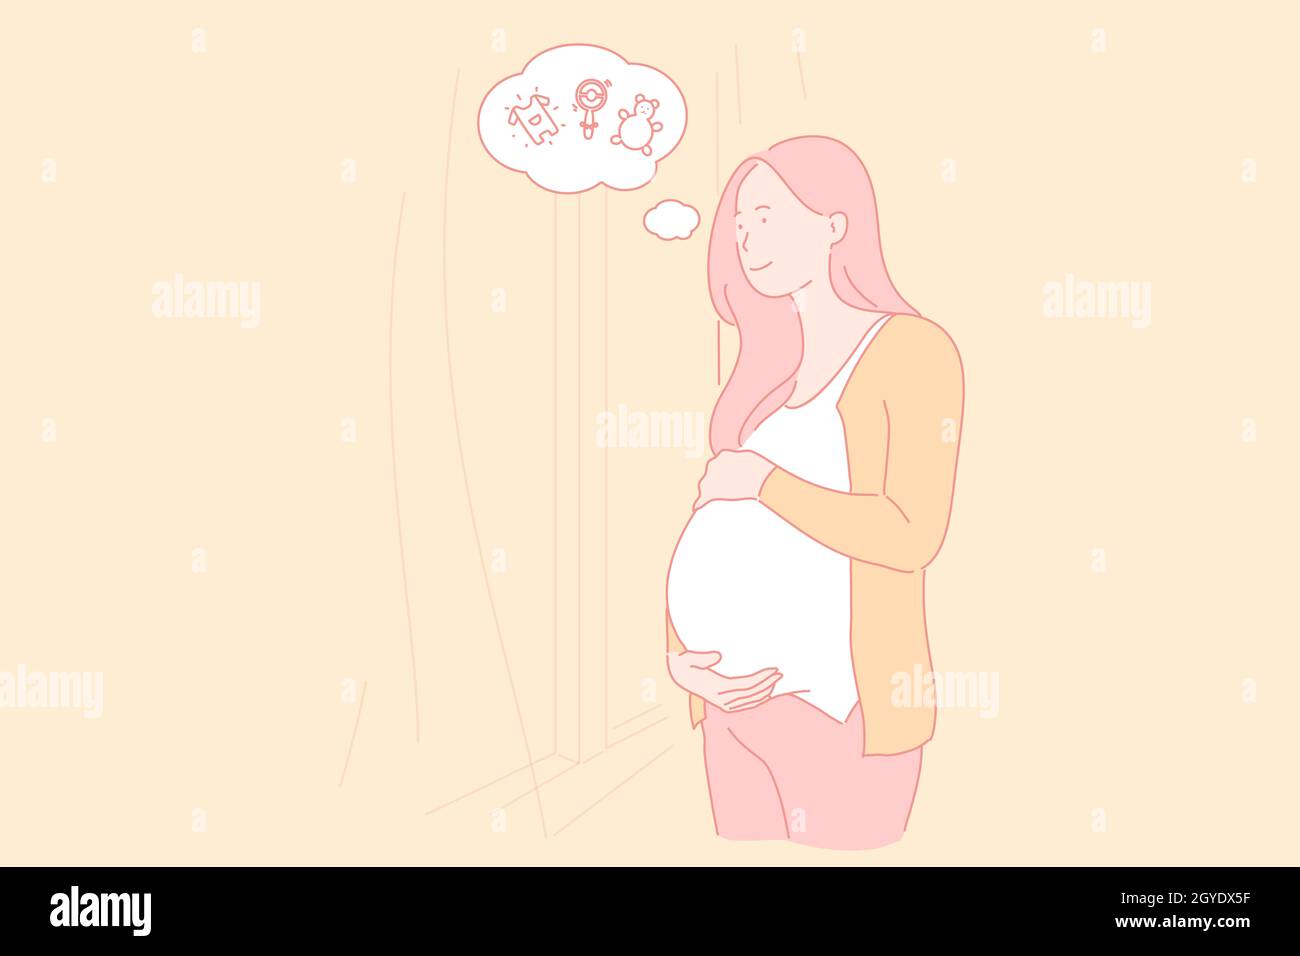 Pregnancy, childbearing, female body condition, expecting baby concept. Young pregnant woman thinking about childish toys, dreaming gravid girl and sp Stock Photo